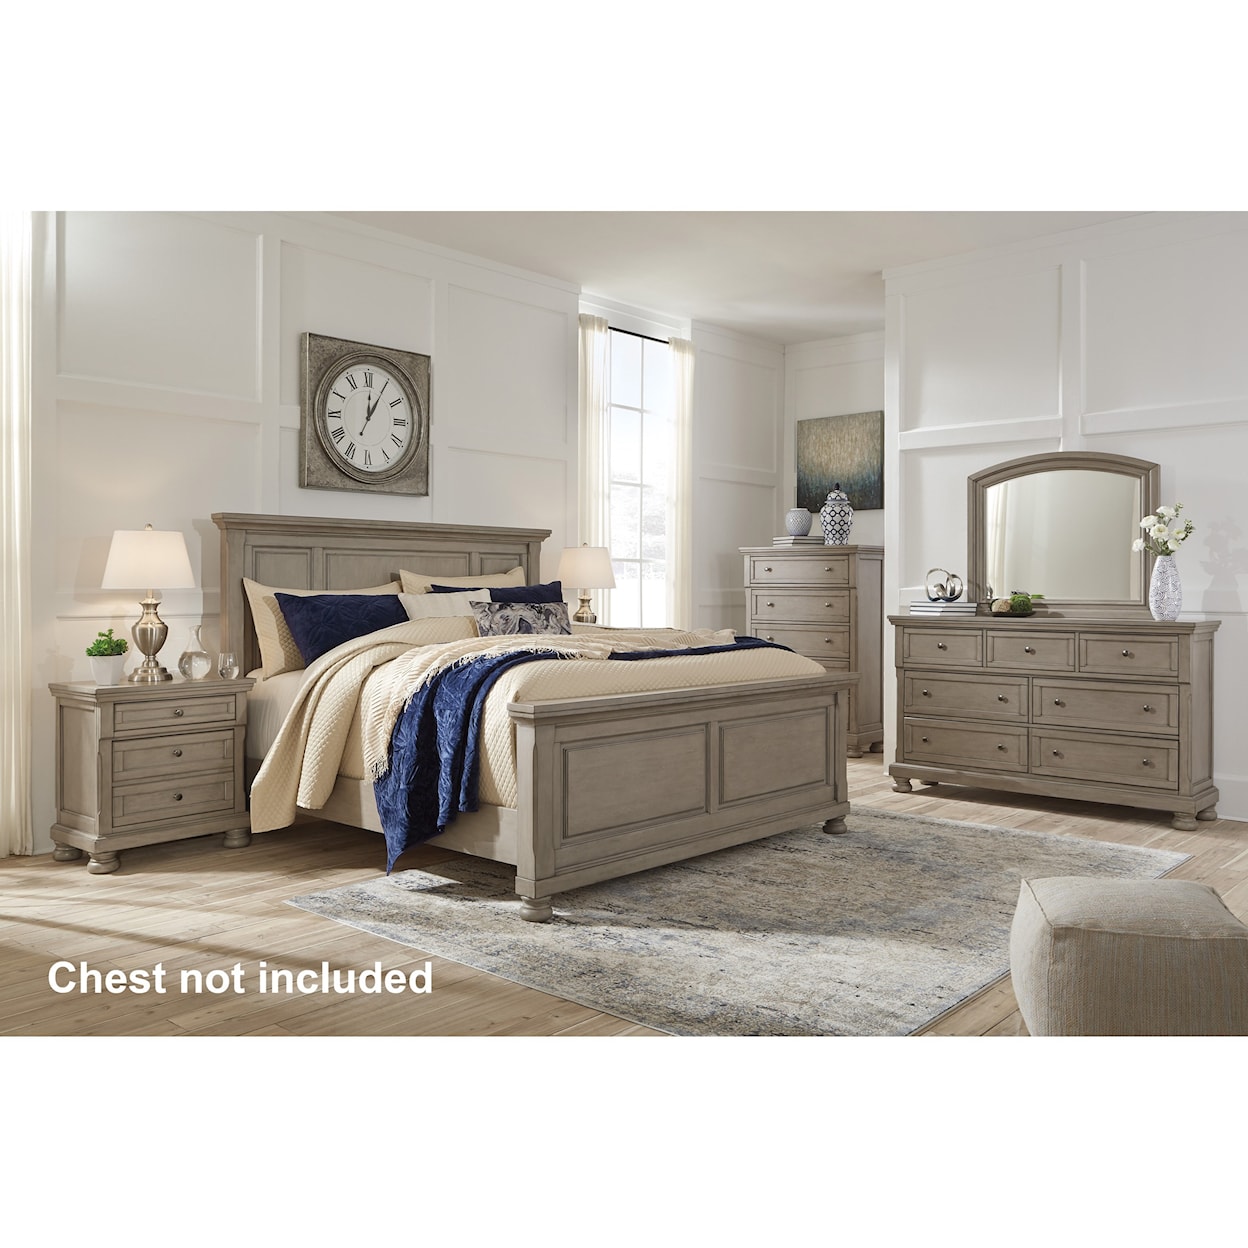 Signature Design by Ashley Lettner 6PC Queen Bedroom Group